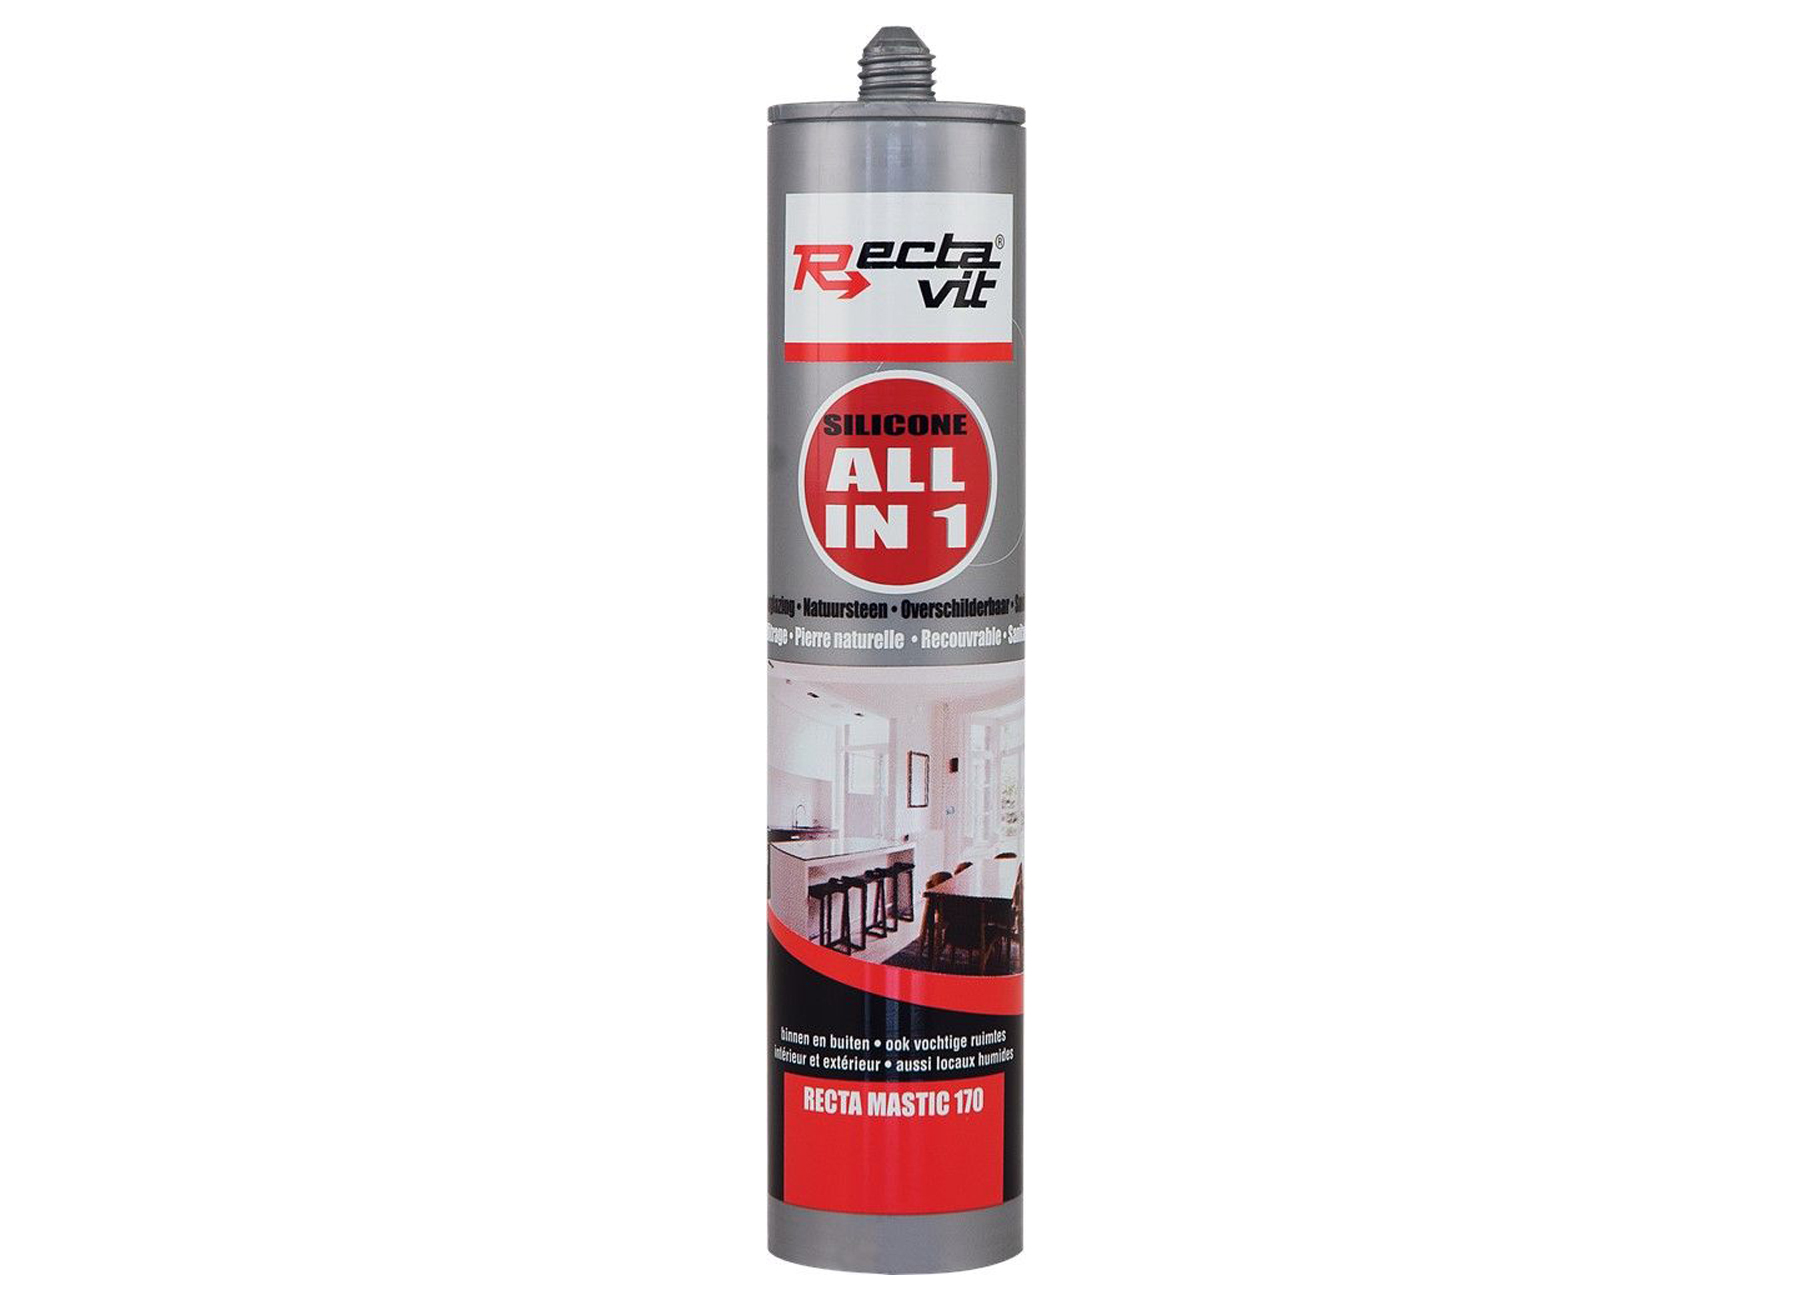 RECTA-MASTIC 170 ALL IN ONE NOIR (RAL 9005) NEUTRAL